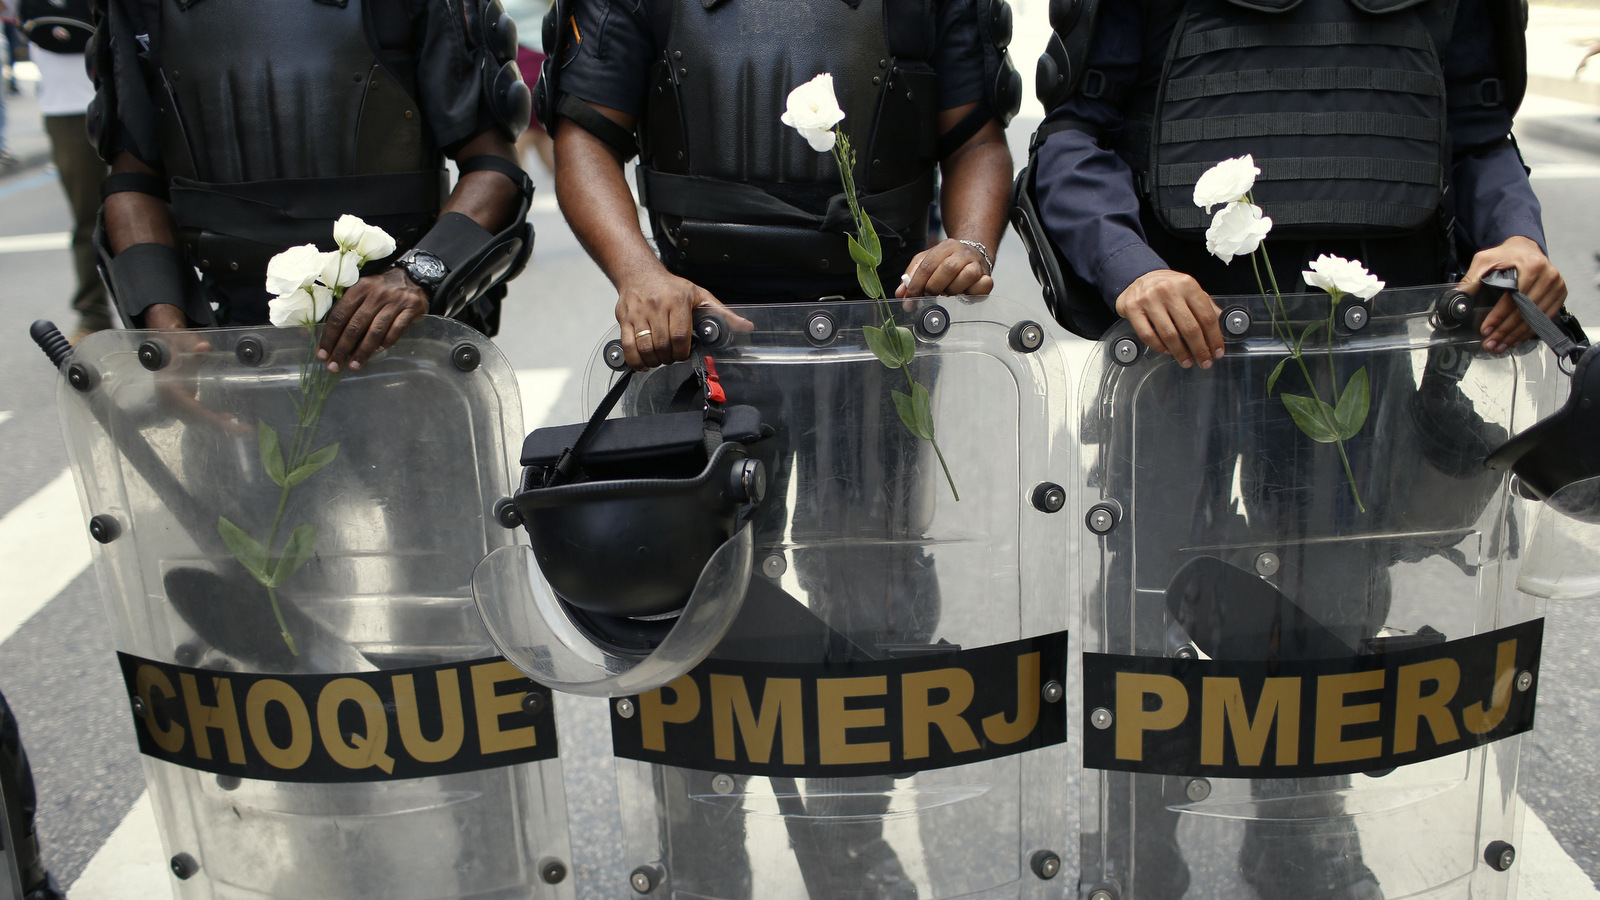 Police officers stand with flowers given to them by demonstrators during a protest against austerity measures outside the state legislature, in Rio de Janeiro, Brazil, Monday, Dec. 12, 2016. Police, firefighters and school teachers are among the workers for Brazil’s Rio de Janeiro state protesting against government austerity measures being considered by lawmakers. (AP Photo/Silvia Izquierdo)